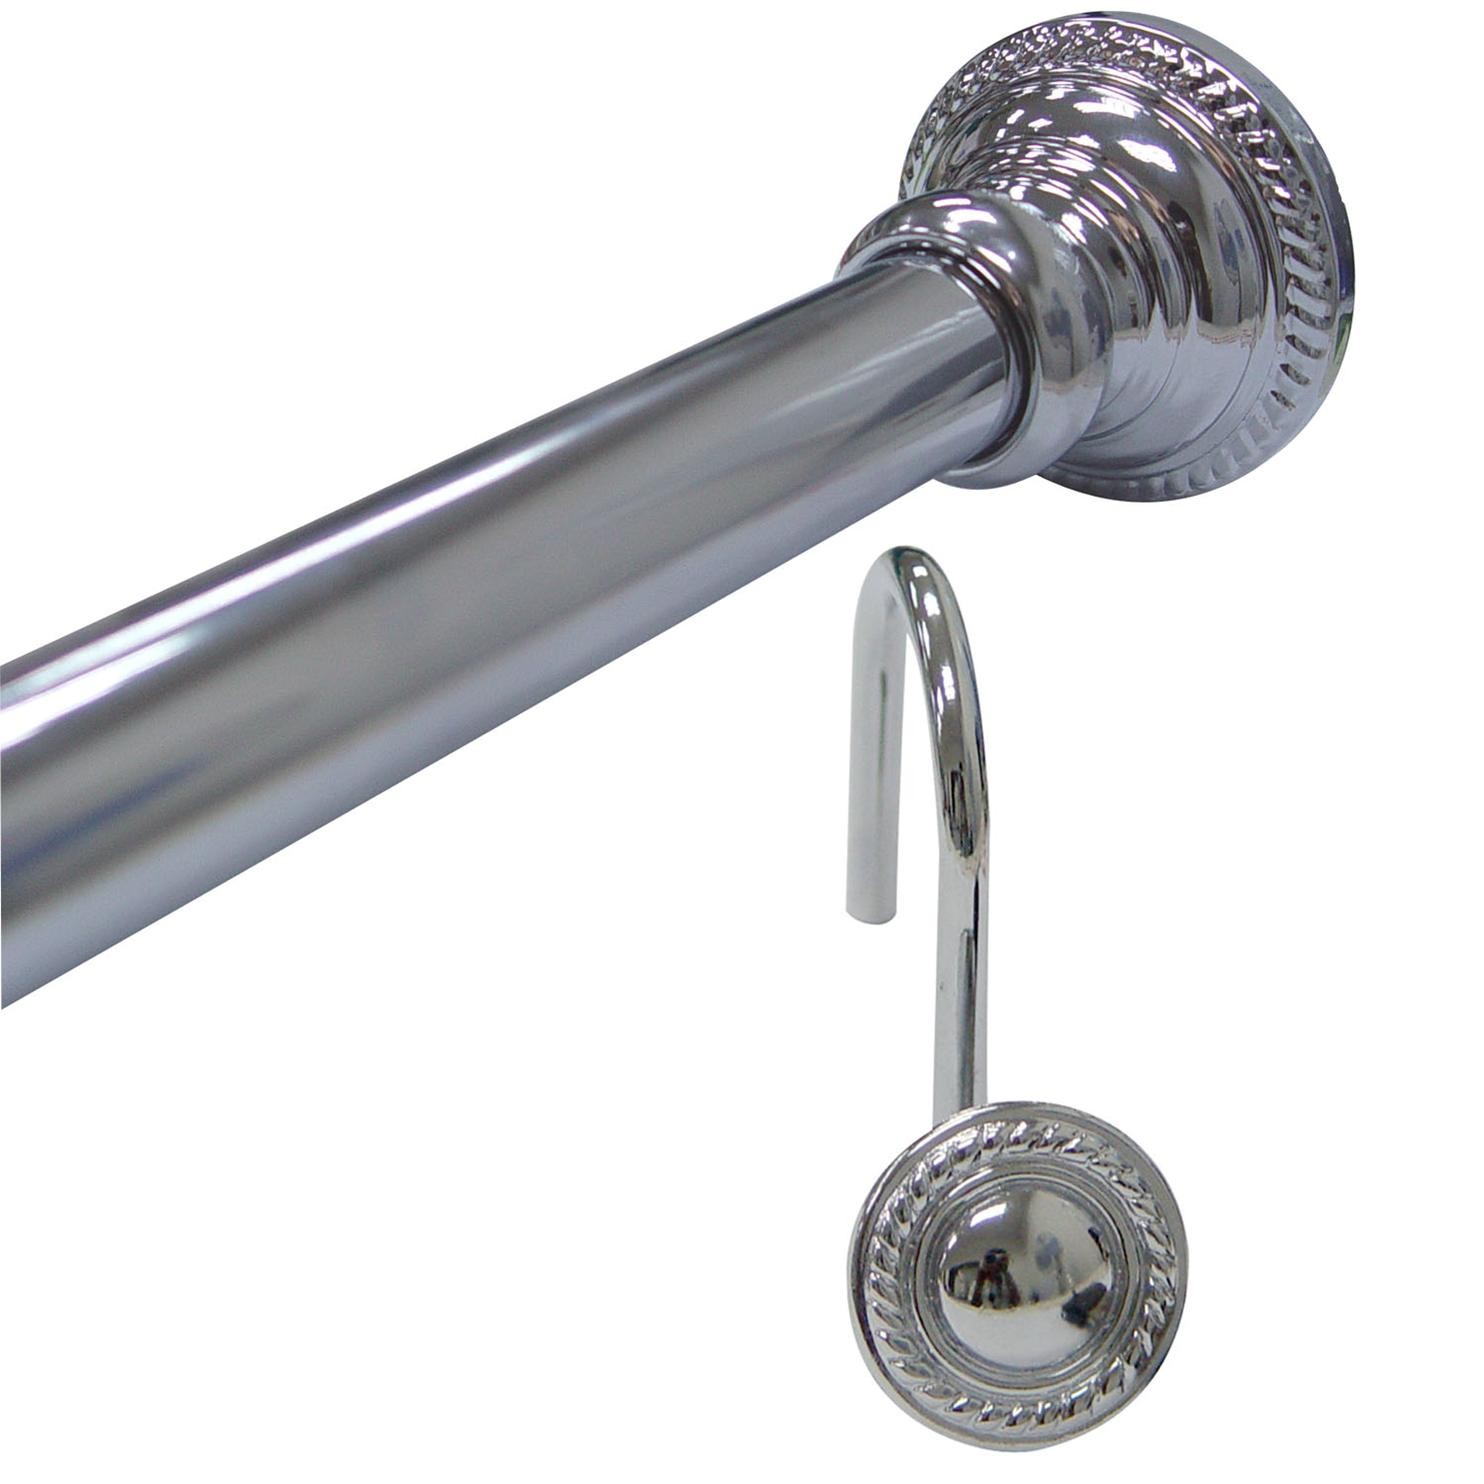 1484x1484px 7 Ideal Adjustable Shower Curtain Rod Picture in Others